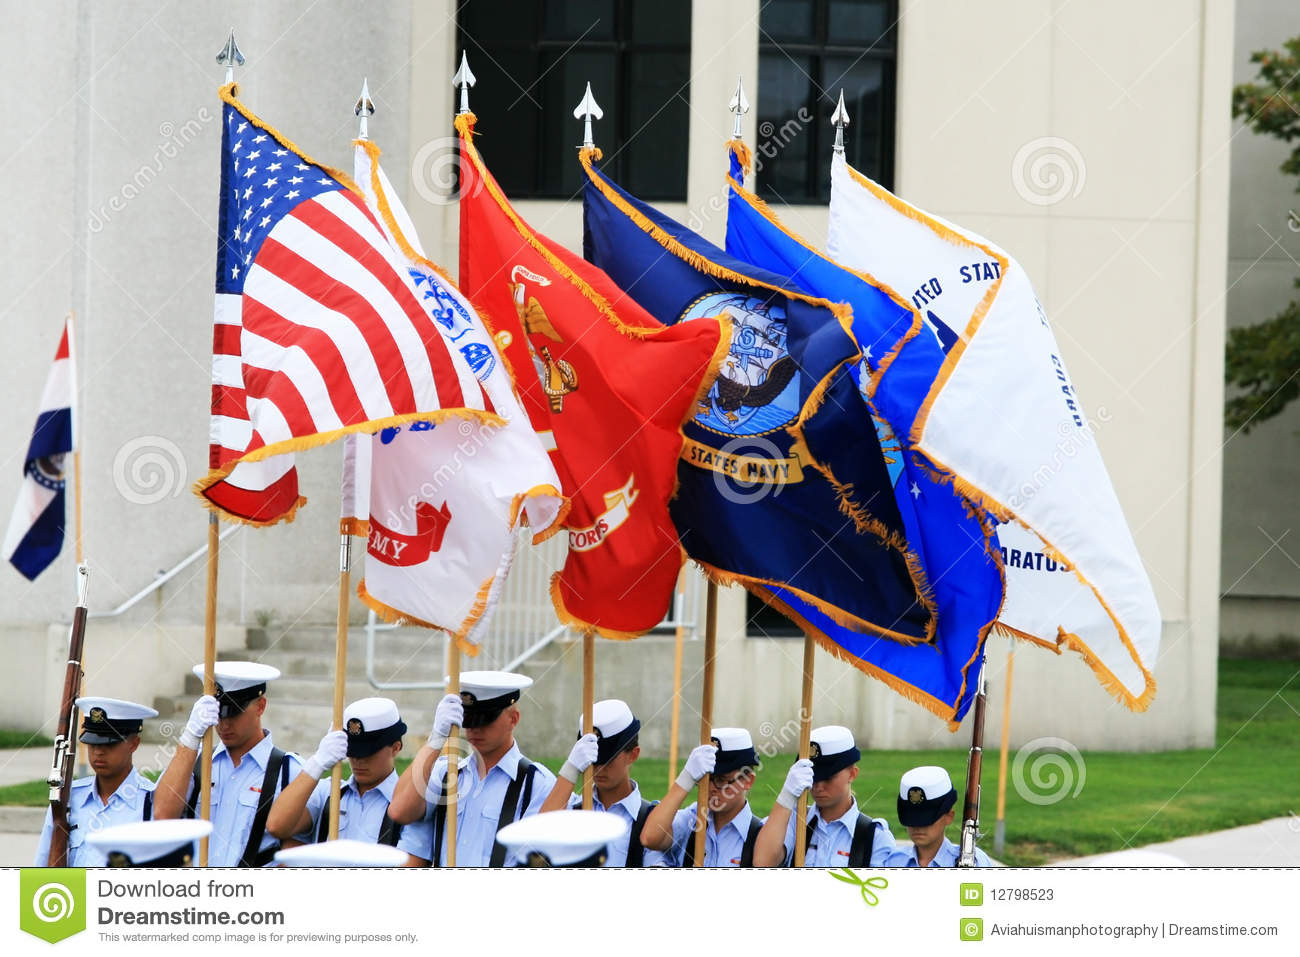 American Flag And The Flags Representing The Branches Of The Military